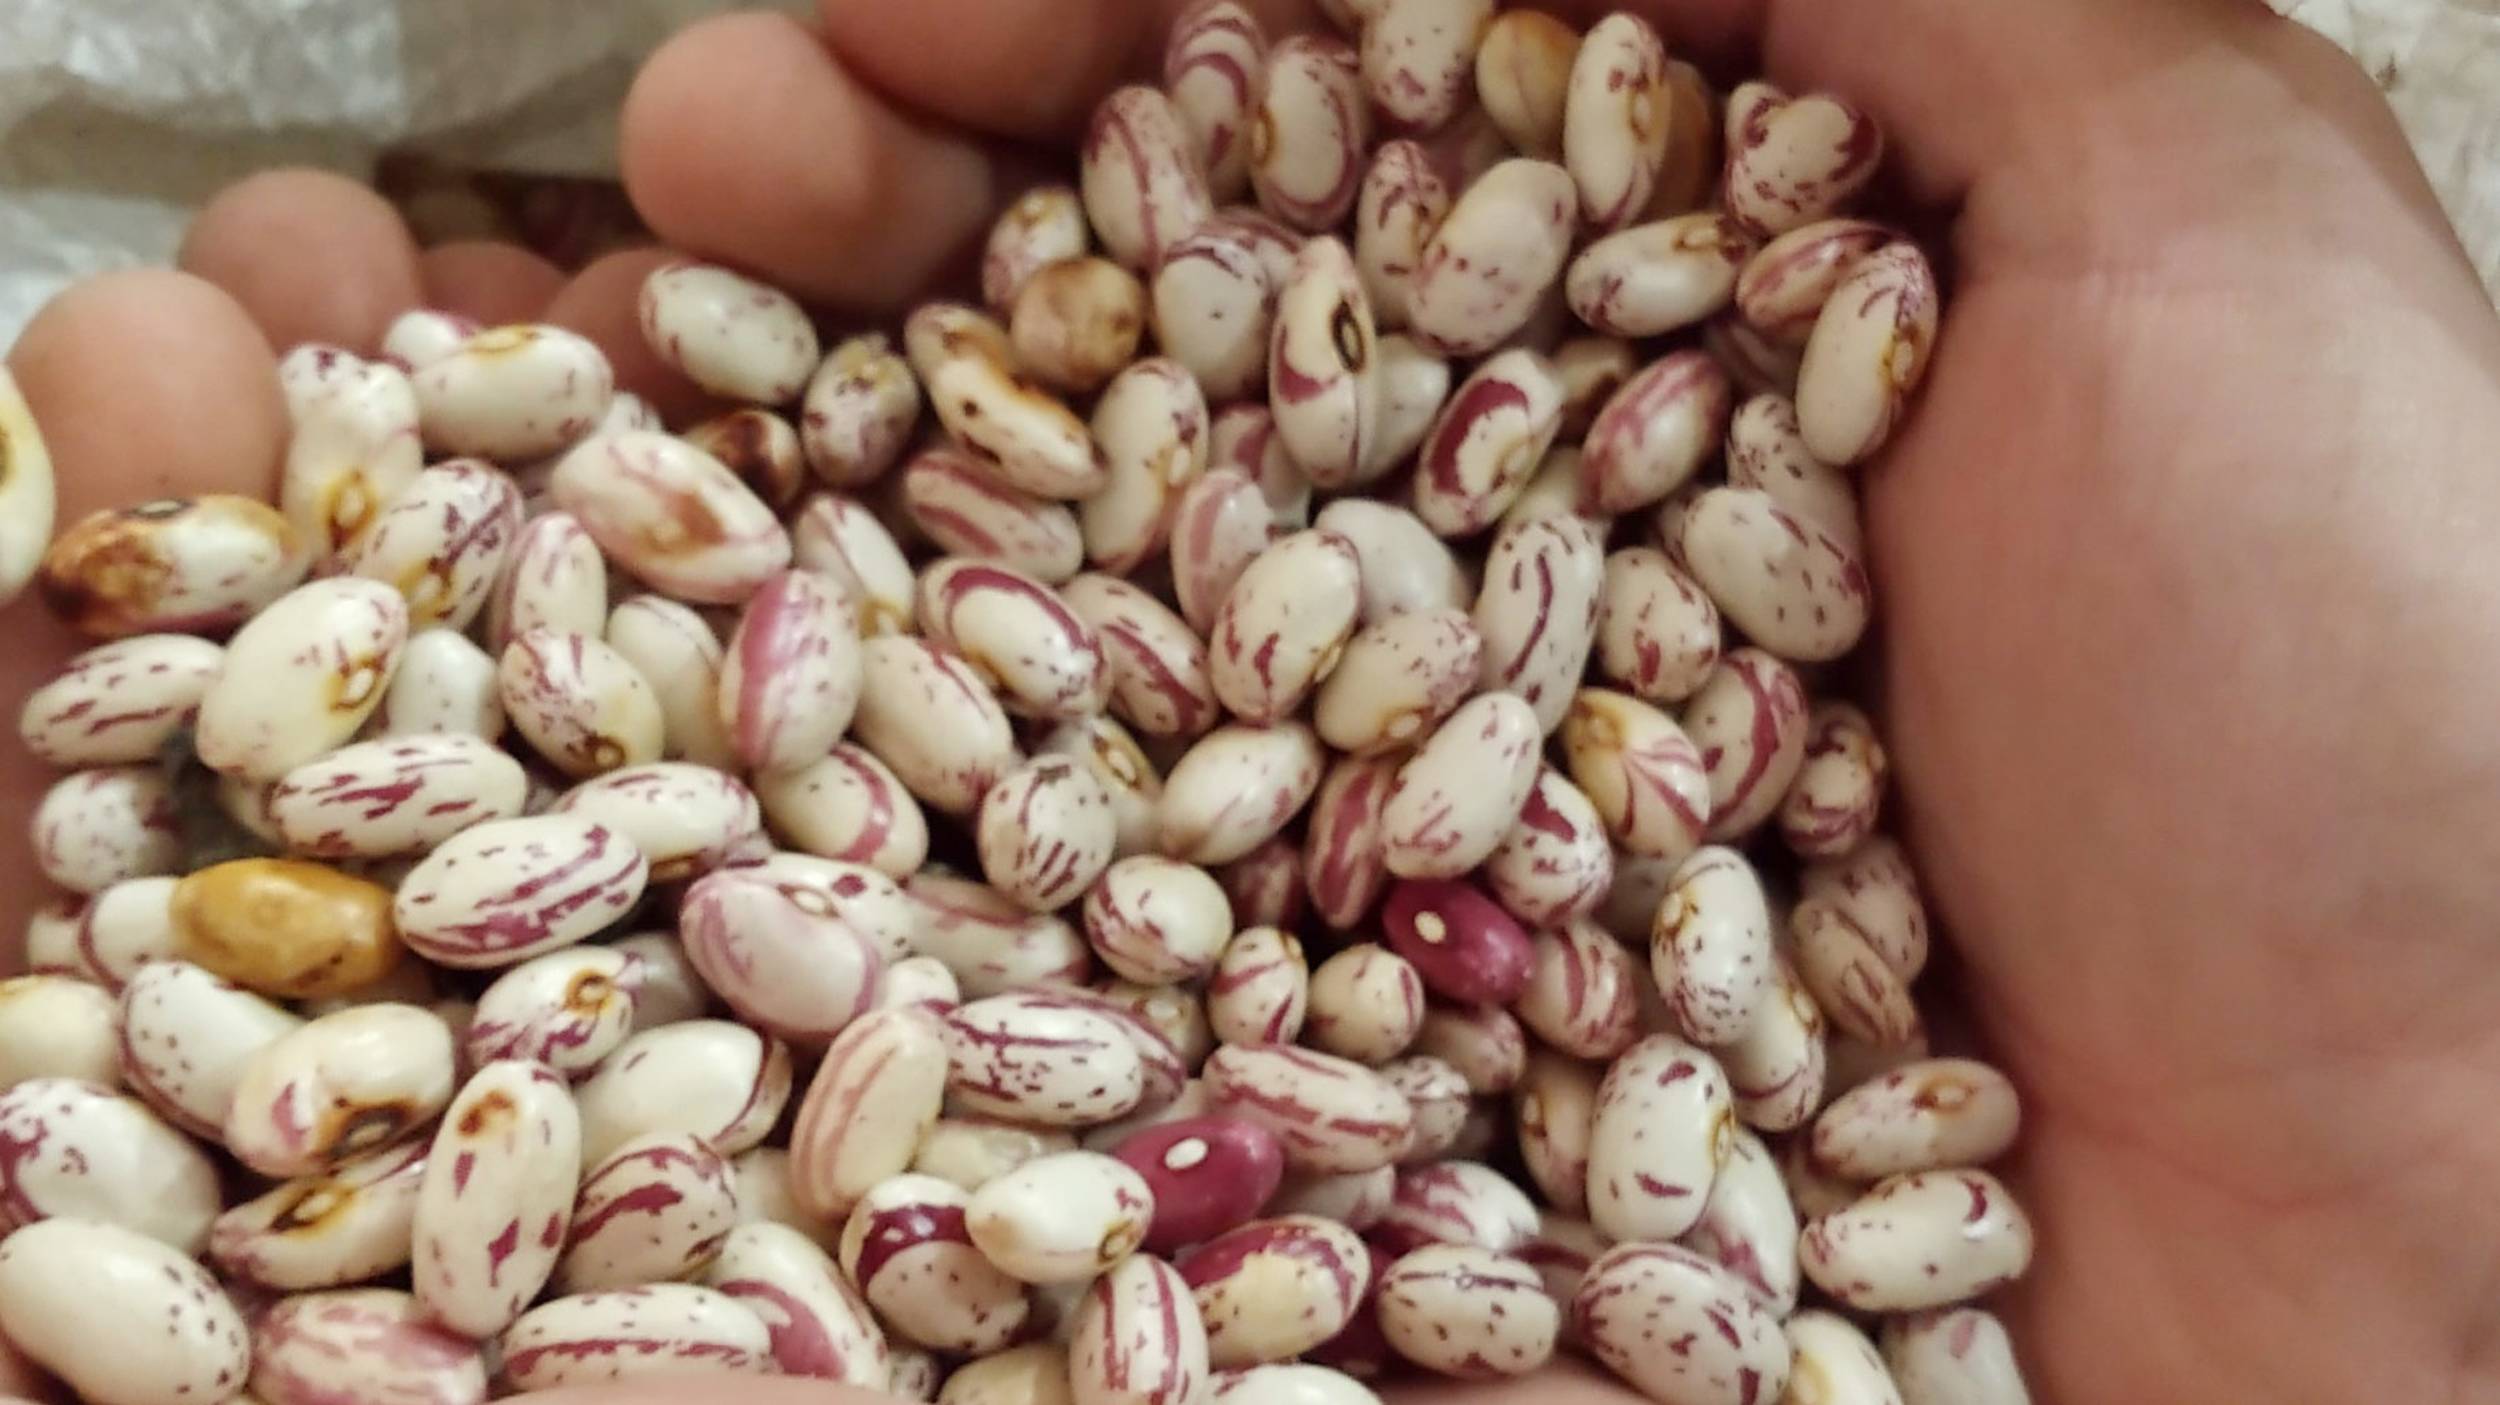 Cranberry beans have a mild, slightly sweet and nutty flavor.